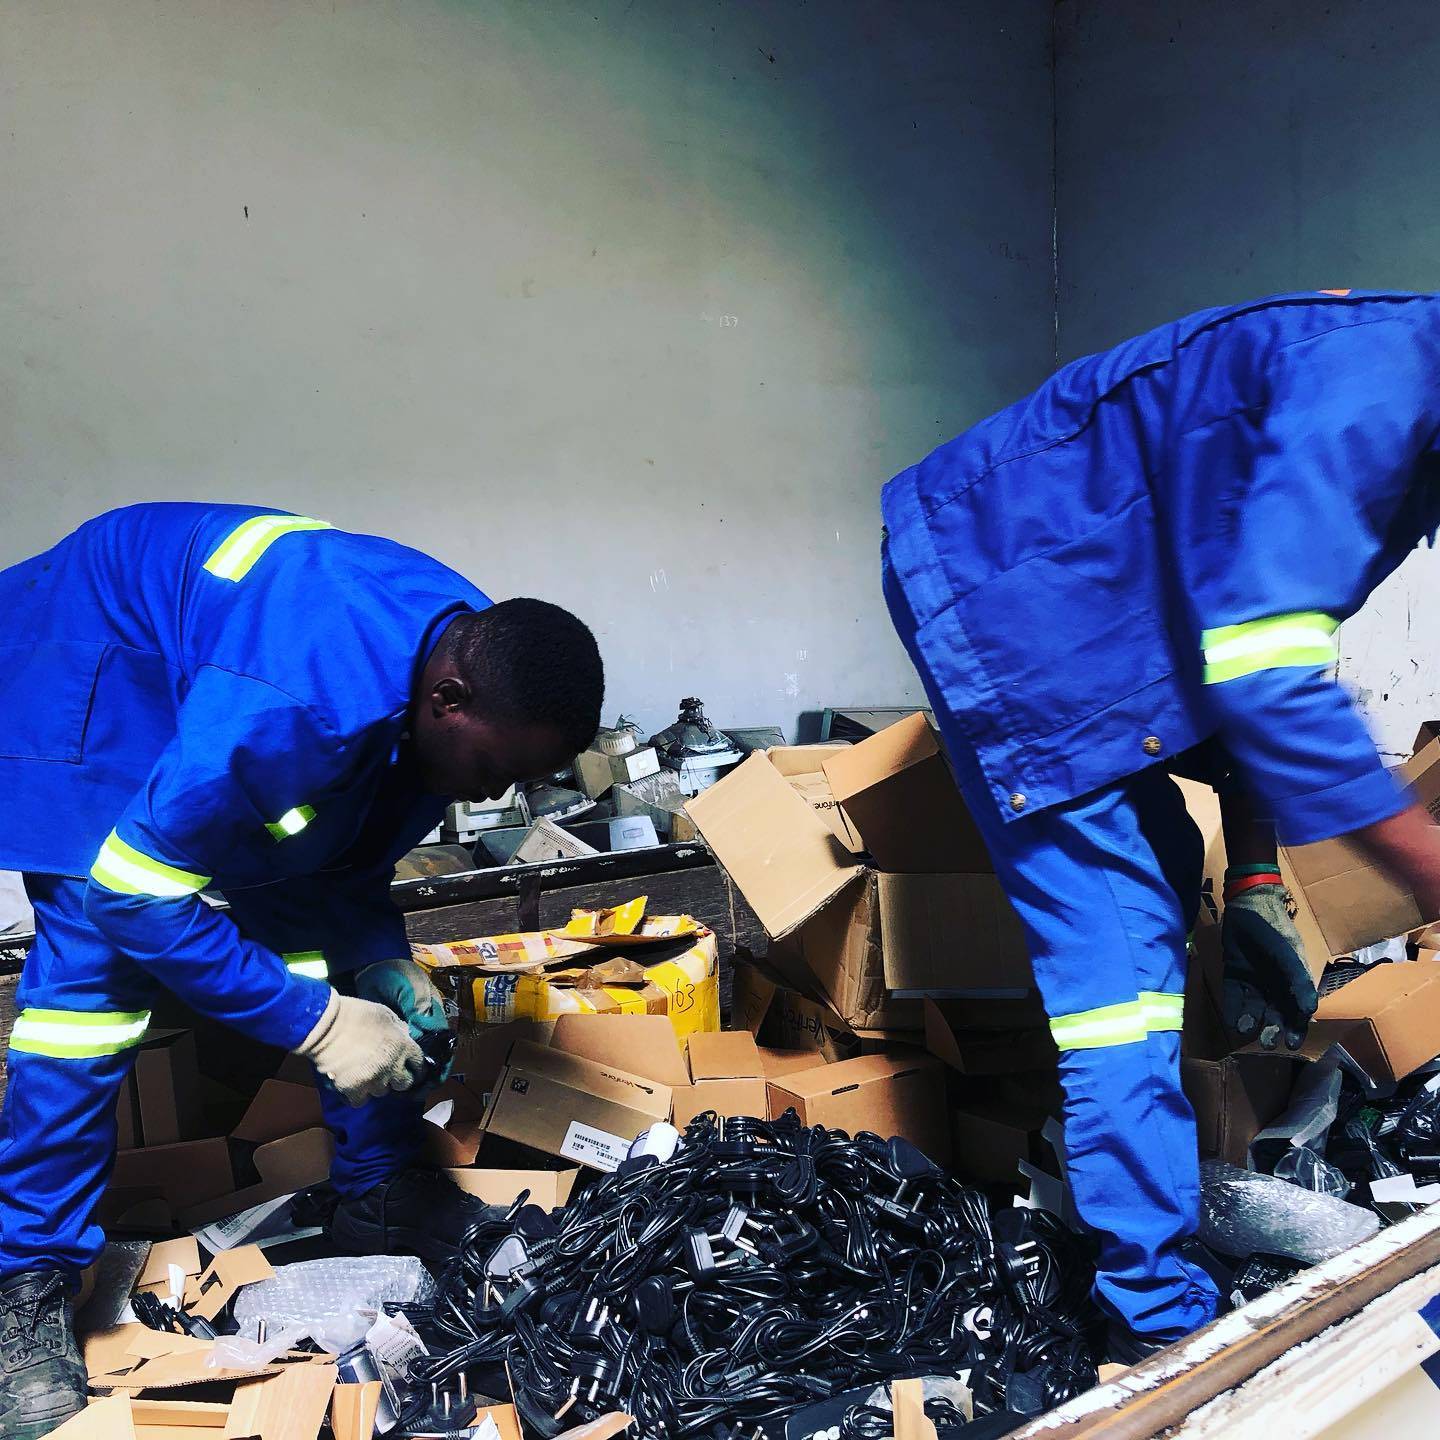 Electronic waste arrives in Africa in the form of ‘donations’